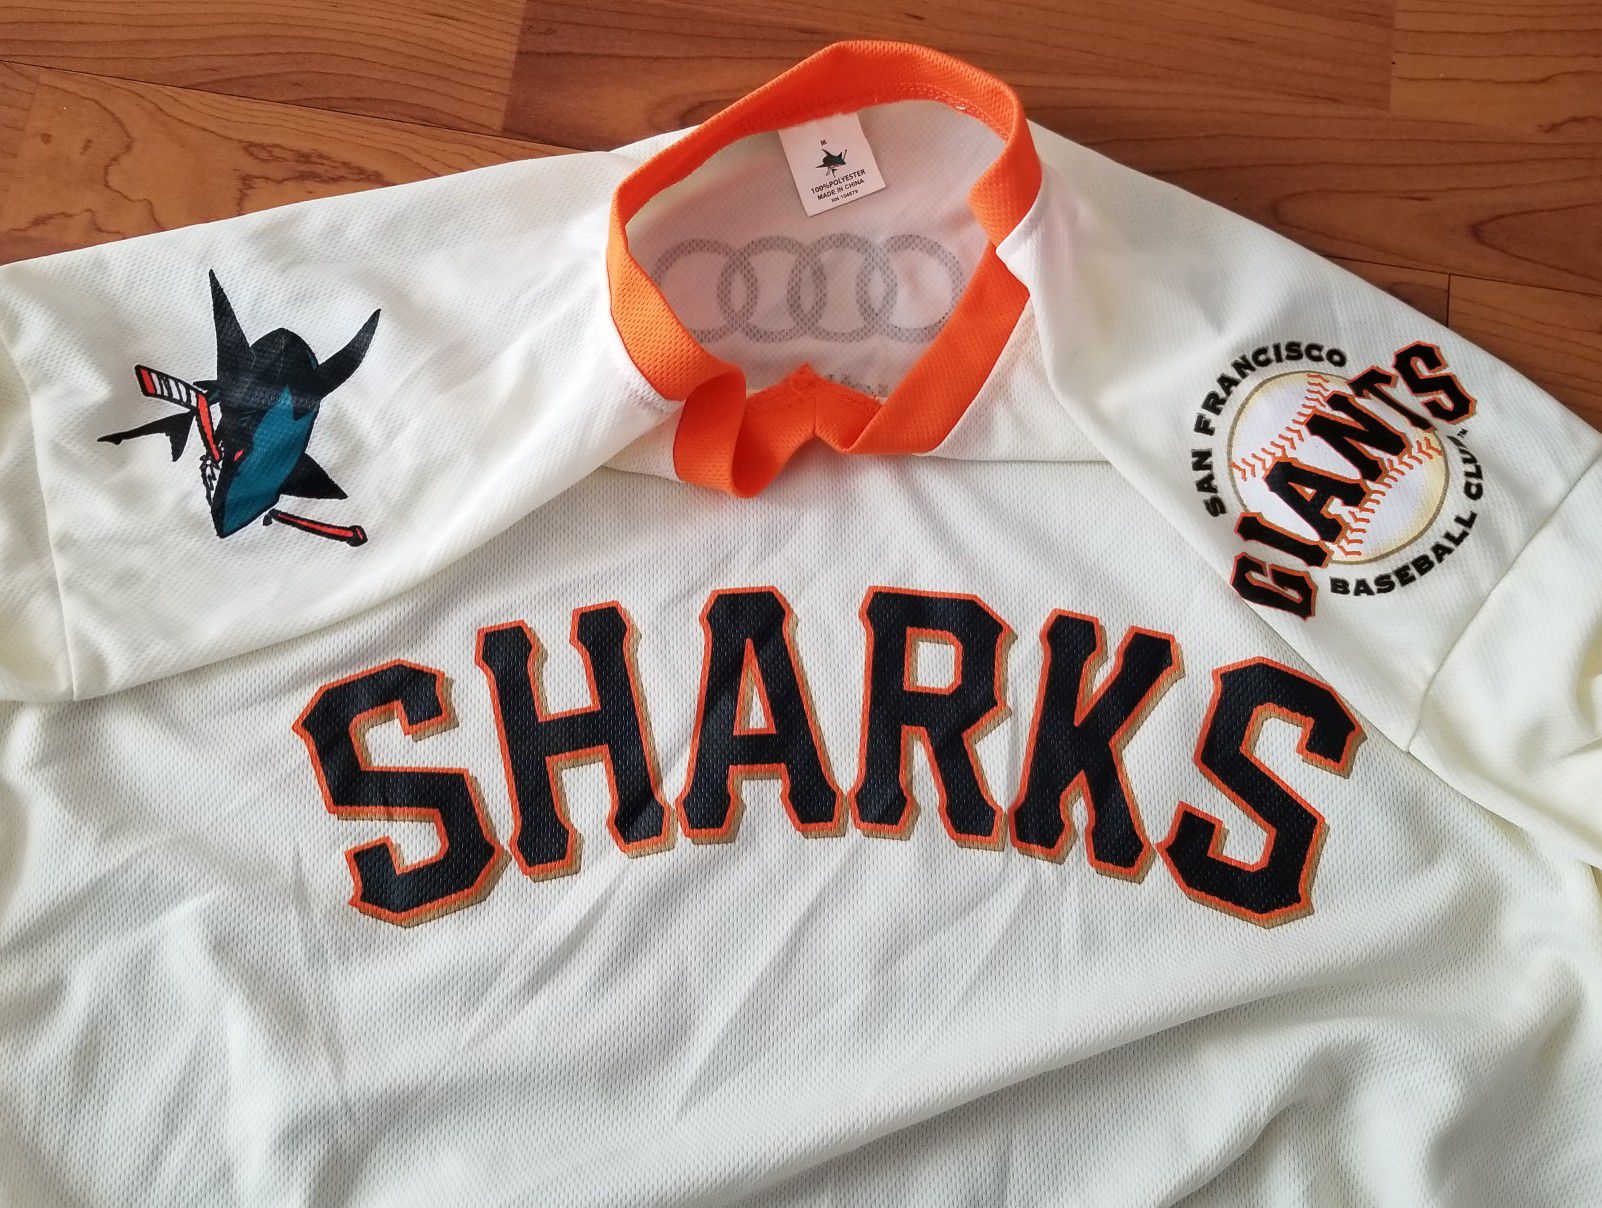 Los Tiburones Sharks Jersey Size XL for Sale in San Jose, CA - OfferUp